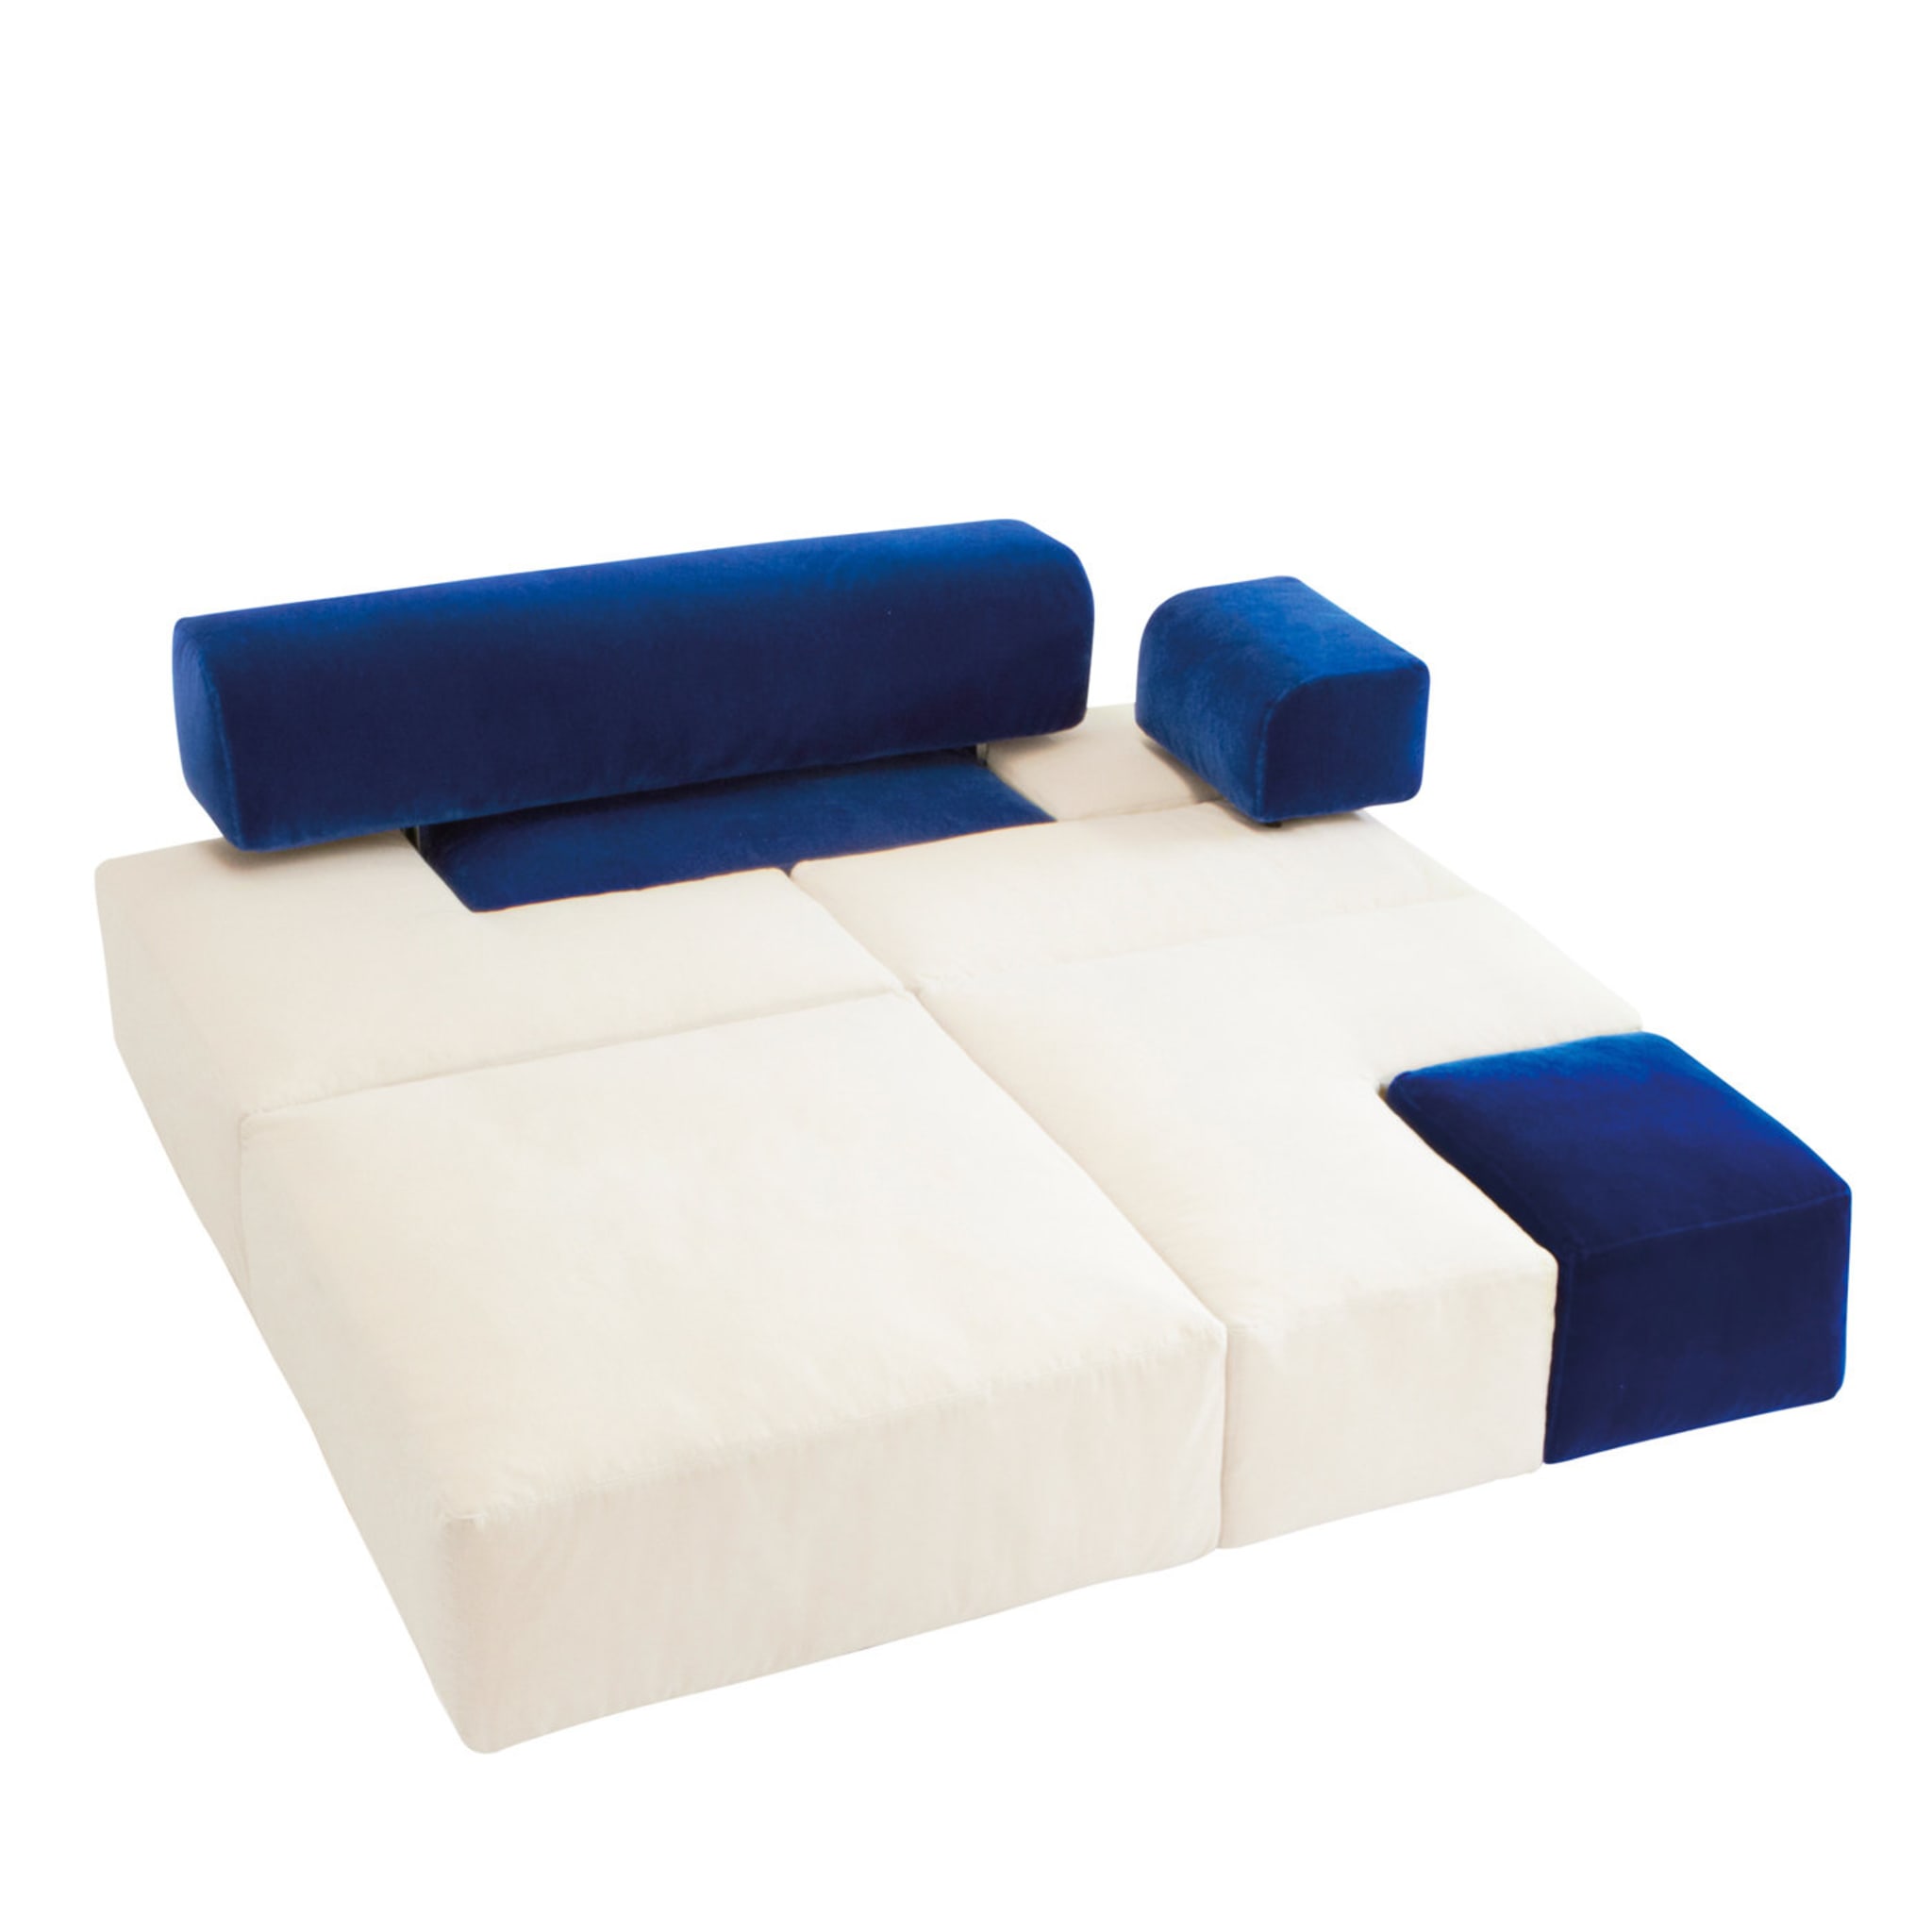 Domino Ecological Sofa by Davide Barzaghi - Main view